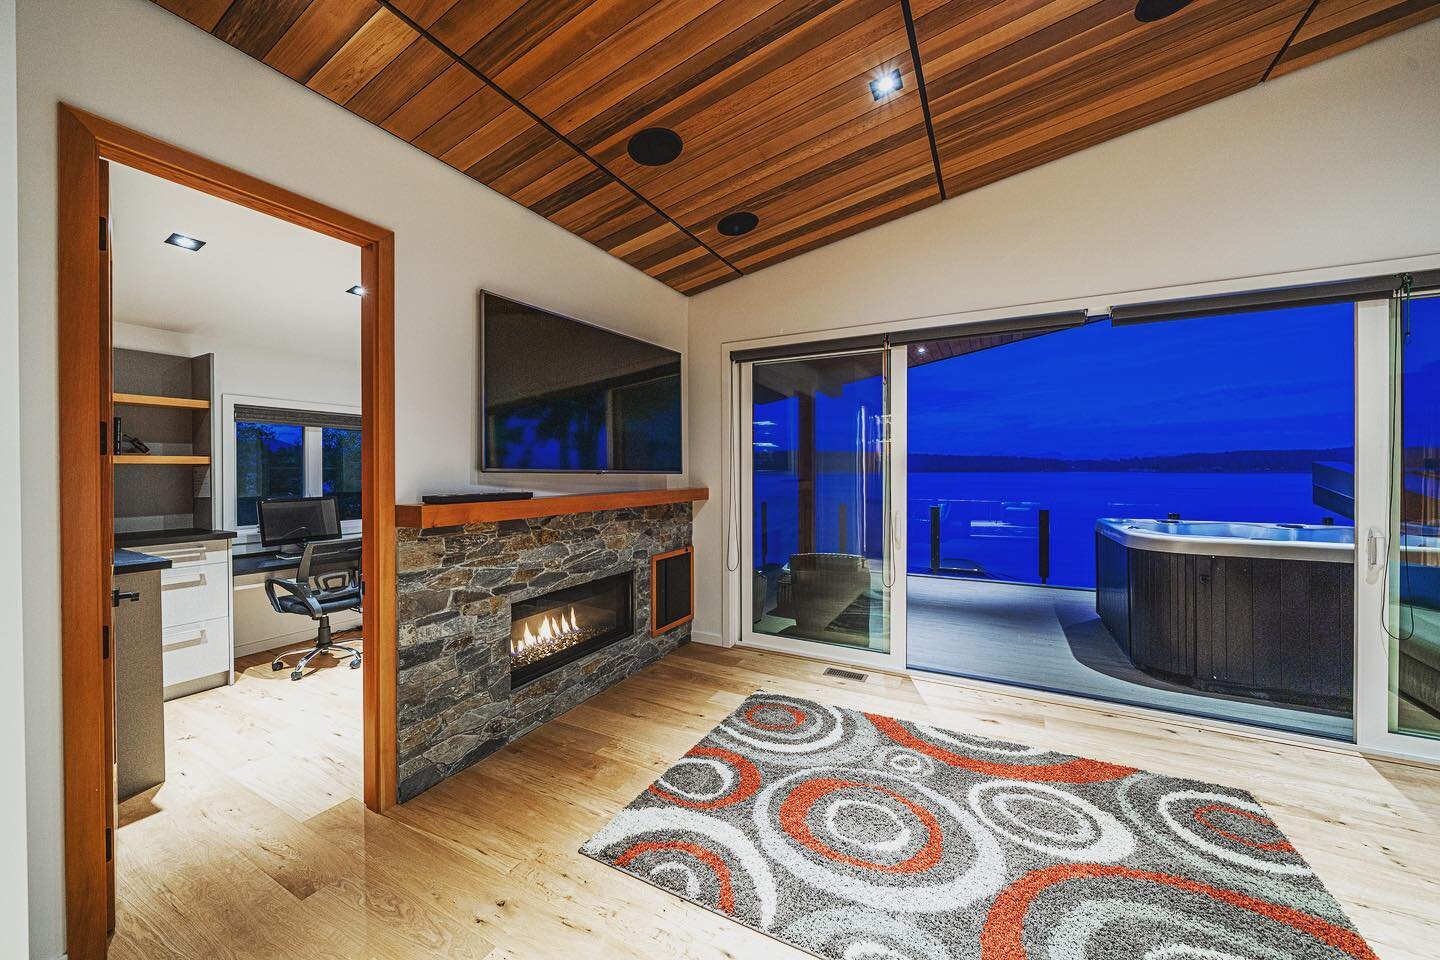 Rec Room with a View 
.
.
Lighting - Wired Electric 
.
Sliders/Windows - @westeckwindows 
.
Glass - @cove_glass_ 
.
📷 - @artezphotography

#modernhome #interior #homedecor #design #home #architecture #homedesign #interiors #decor #moderndesign #mode